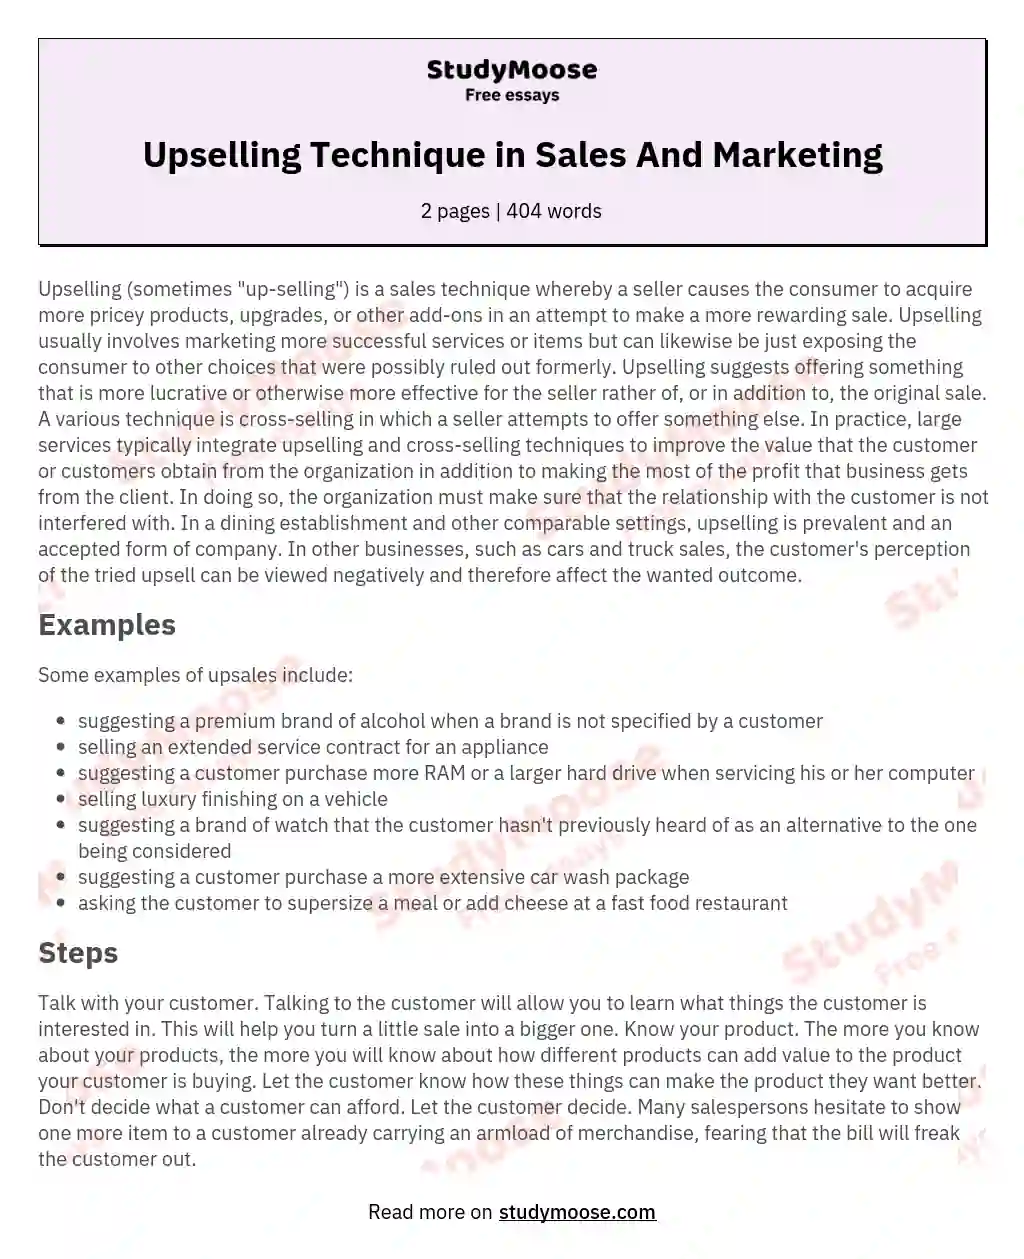 Upselling Technique in Sales And Marketing essay